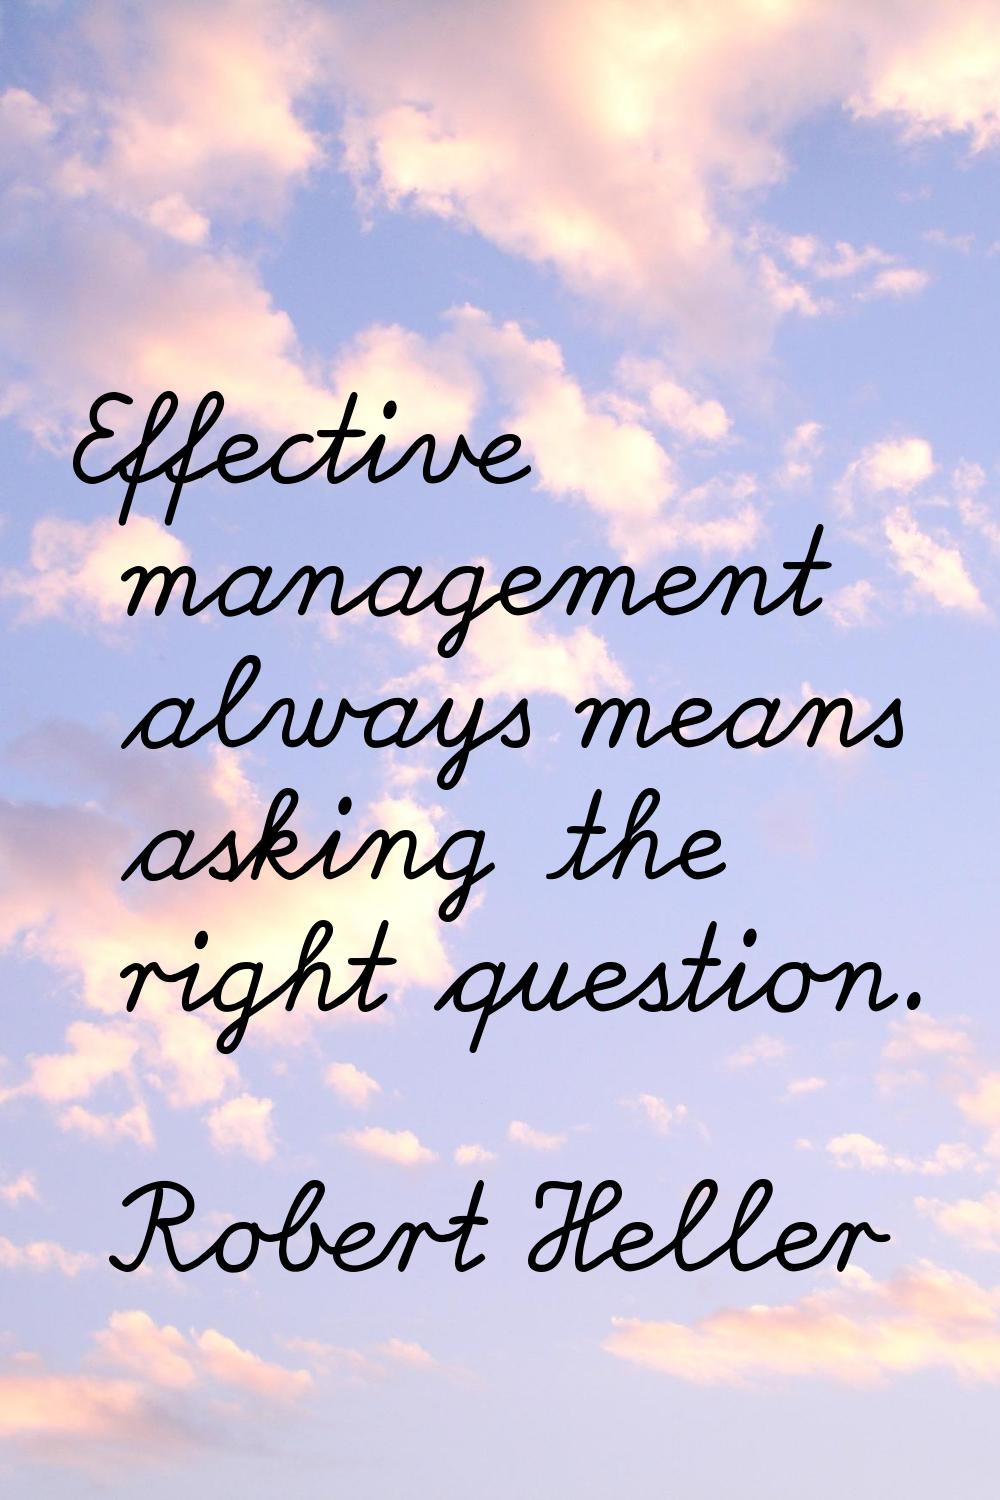 Effective management always means asking the right question.